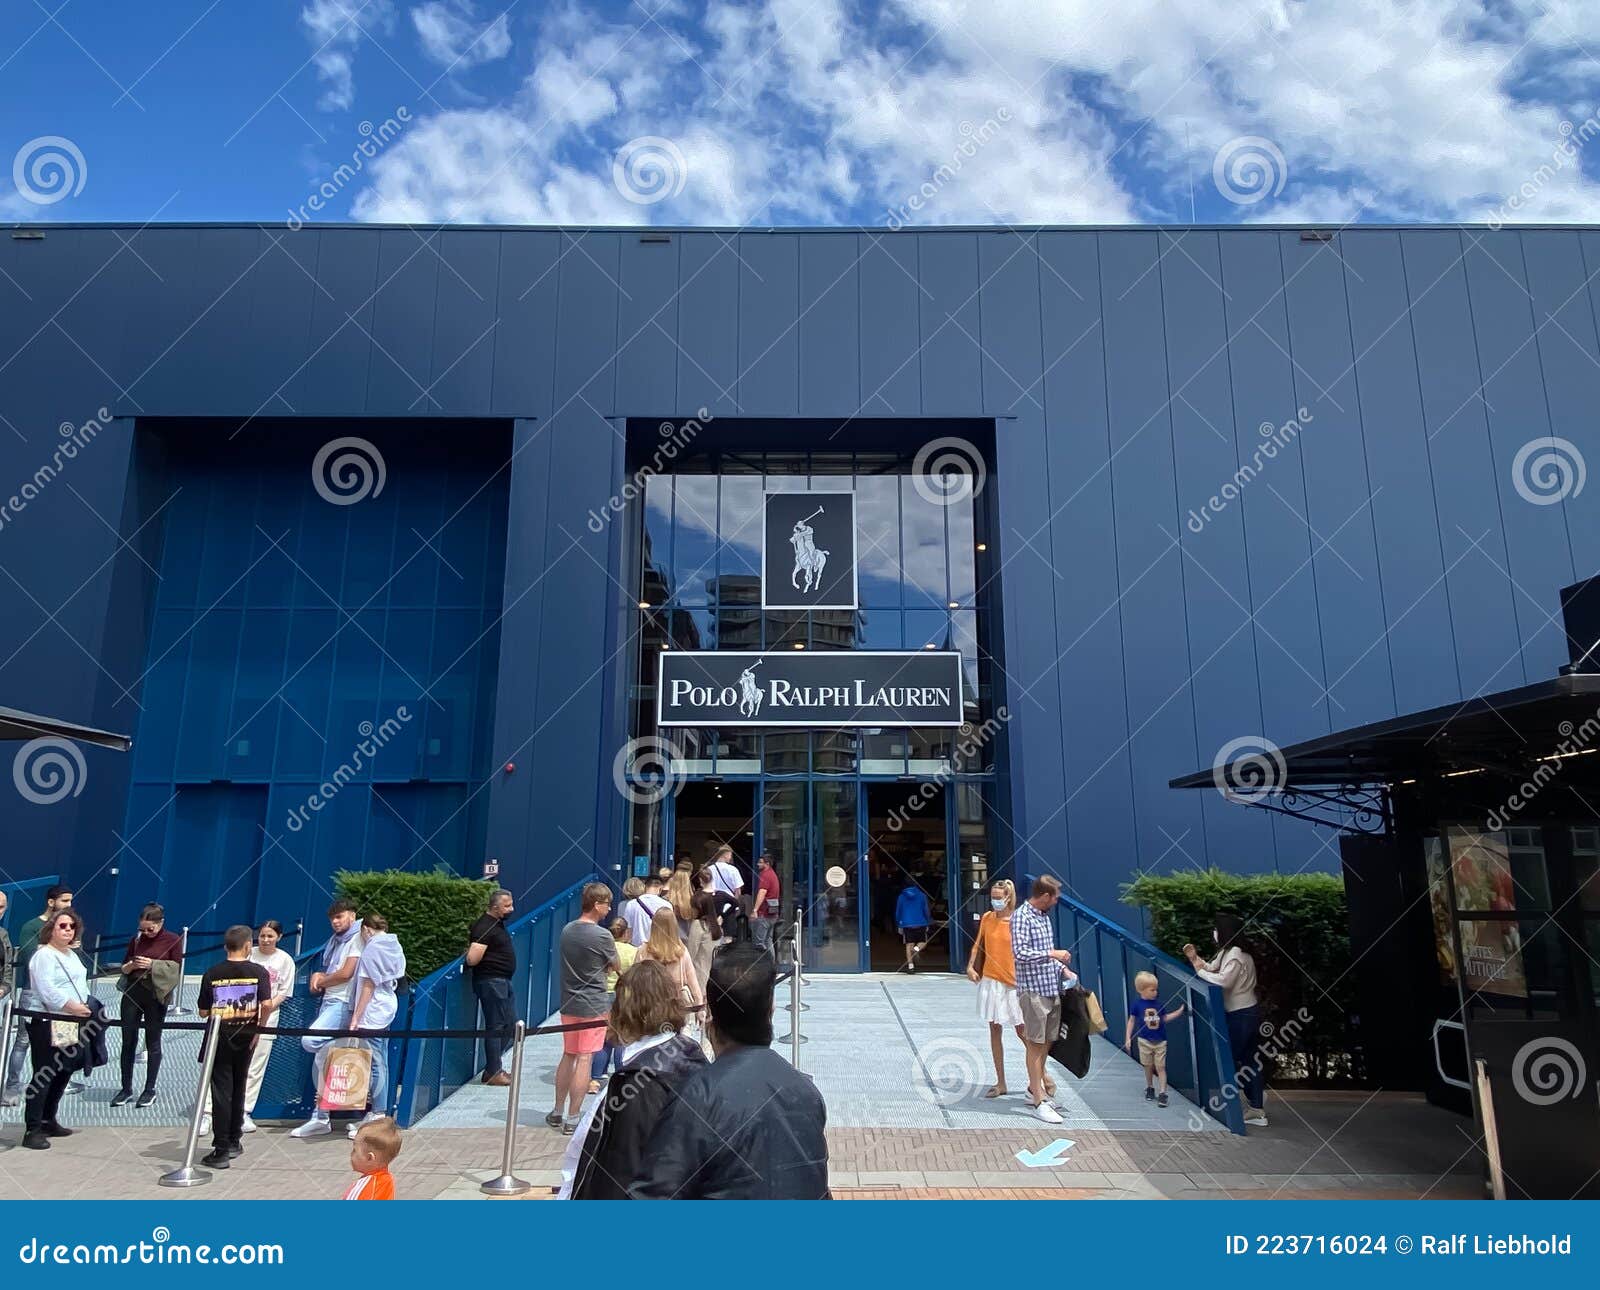 Baars Zuivelproducten Mus View on Blue Facade of Polo Ralph Lauren Fashion Store with Queue of People  Exterior of Entrance Editorial Stock Image - Image of label, entrance:  223716024